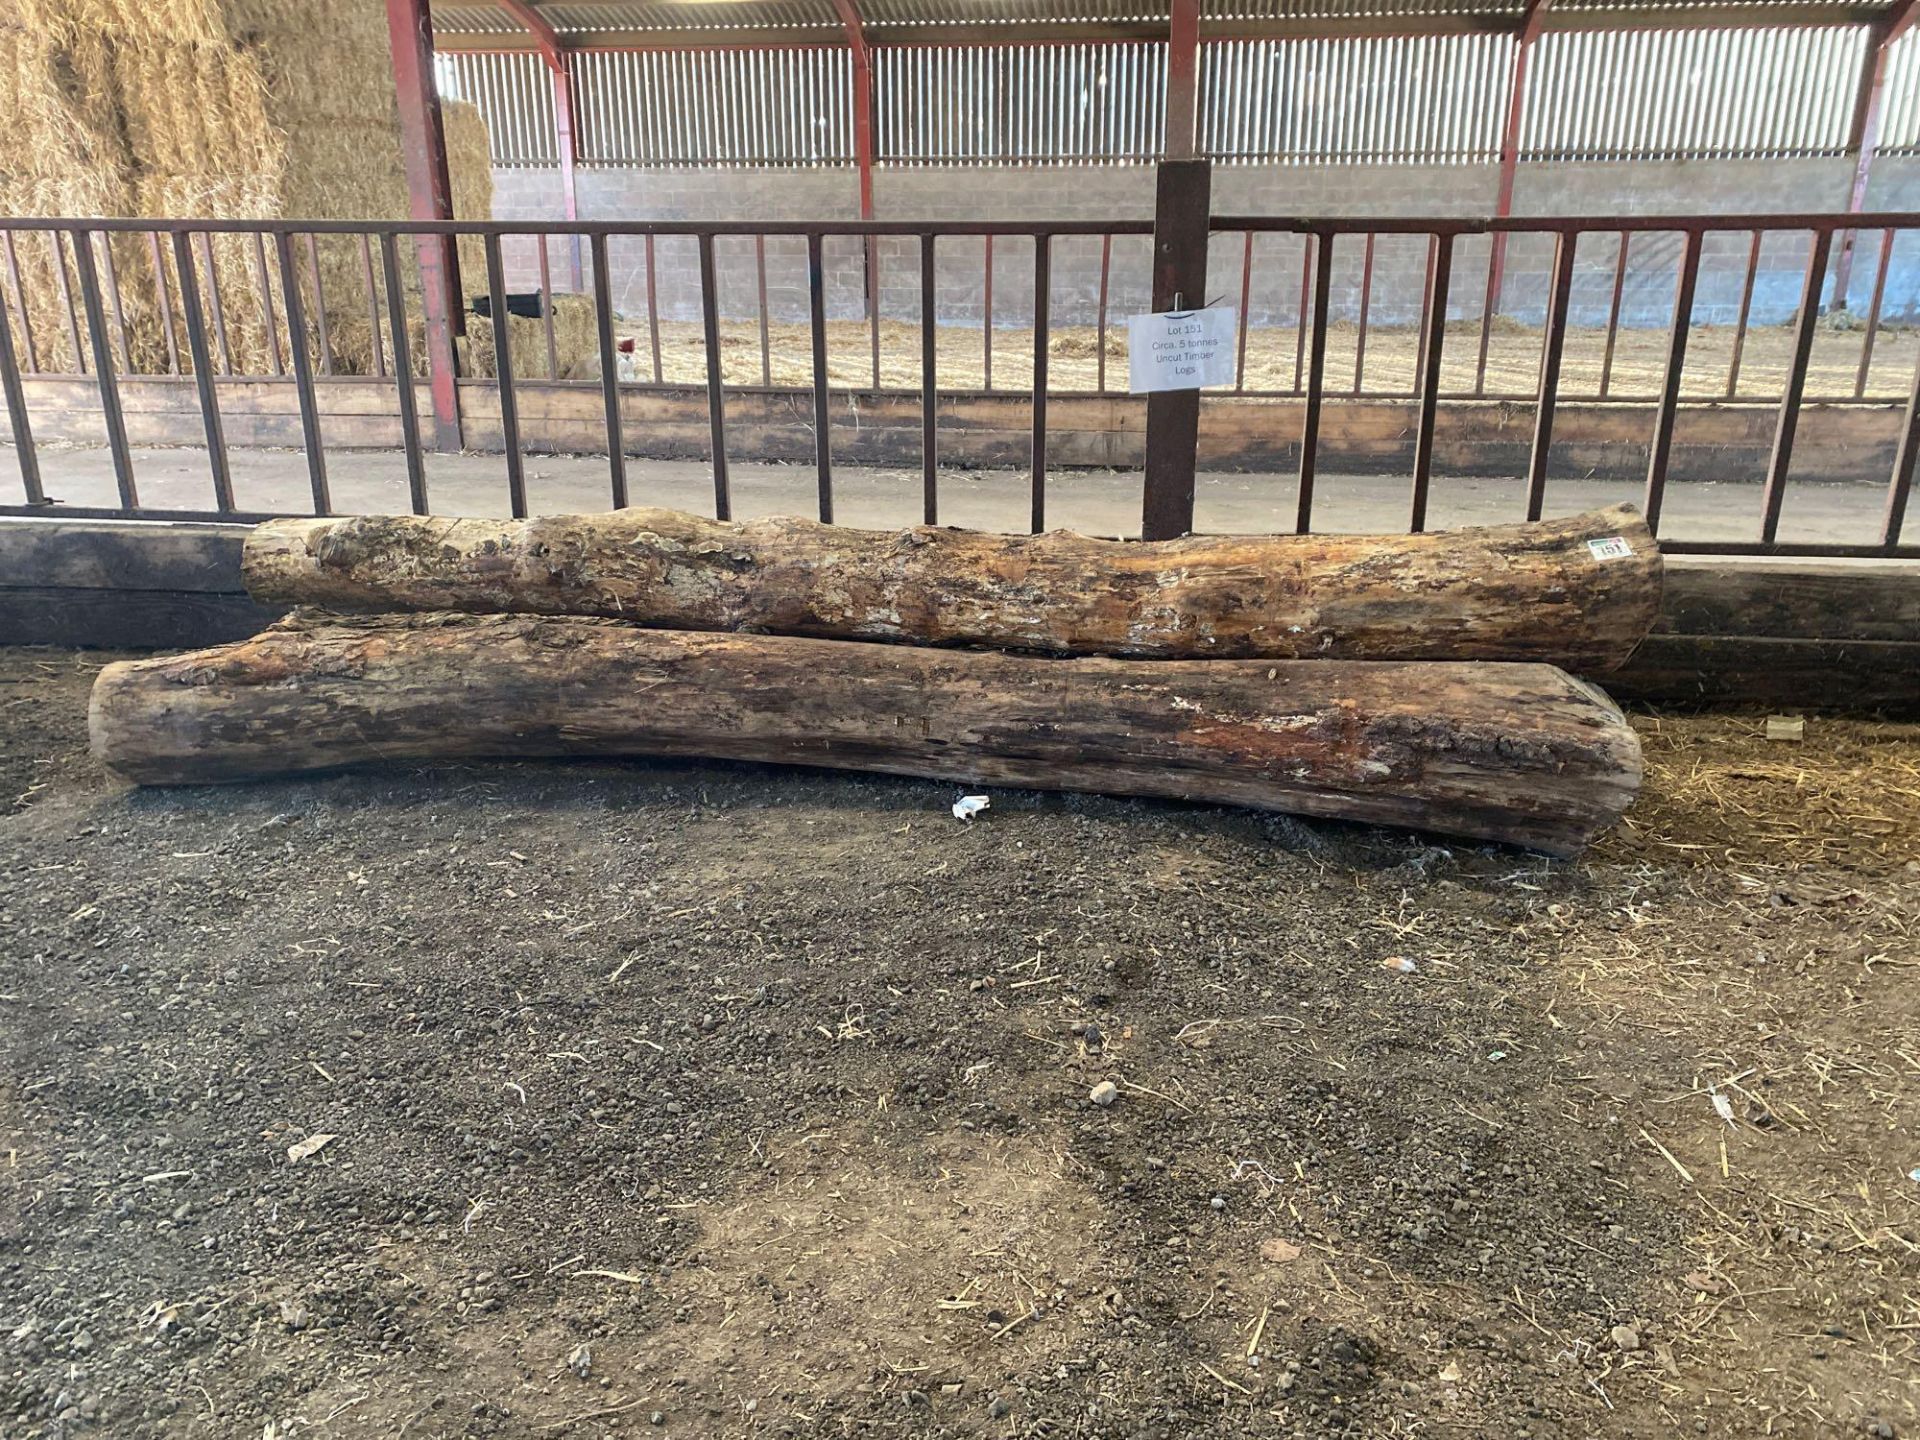 Qty of uncut timber - Approx 5 tons